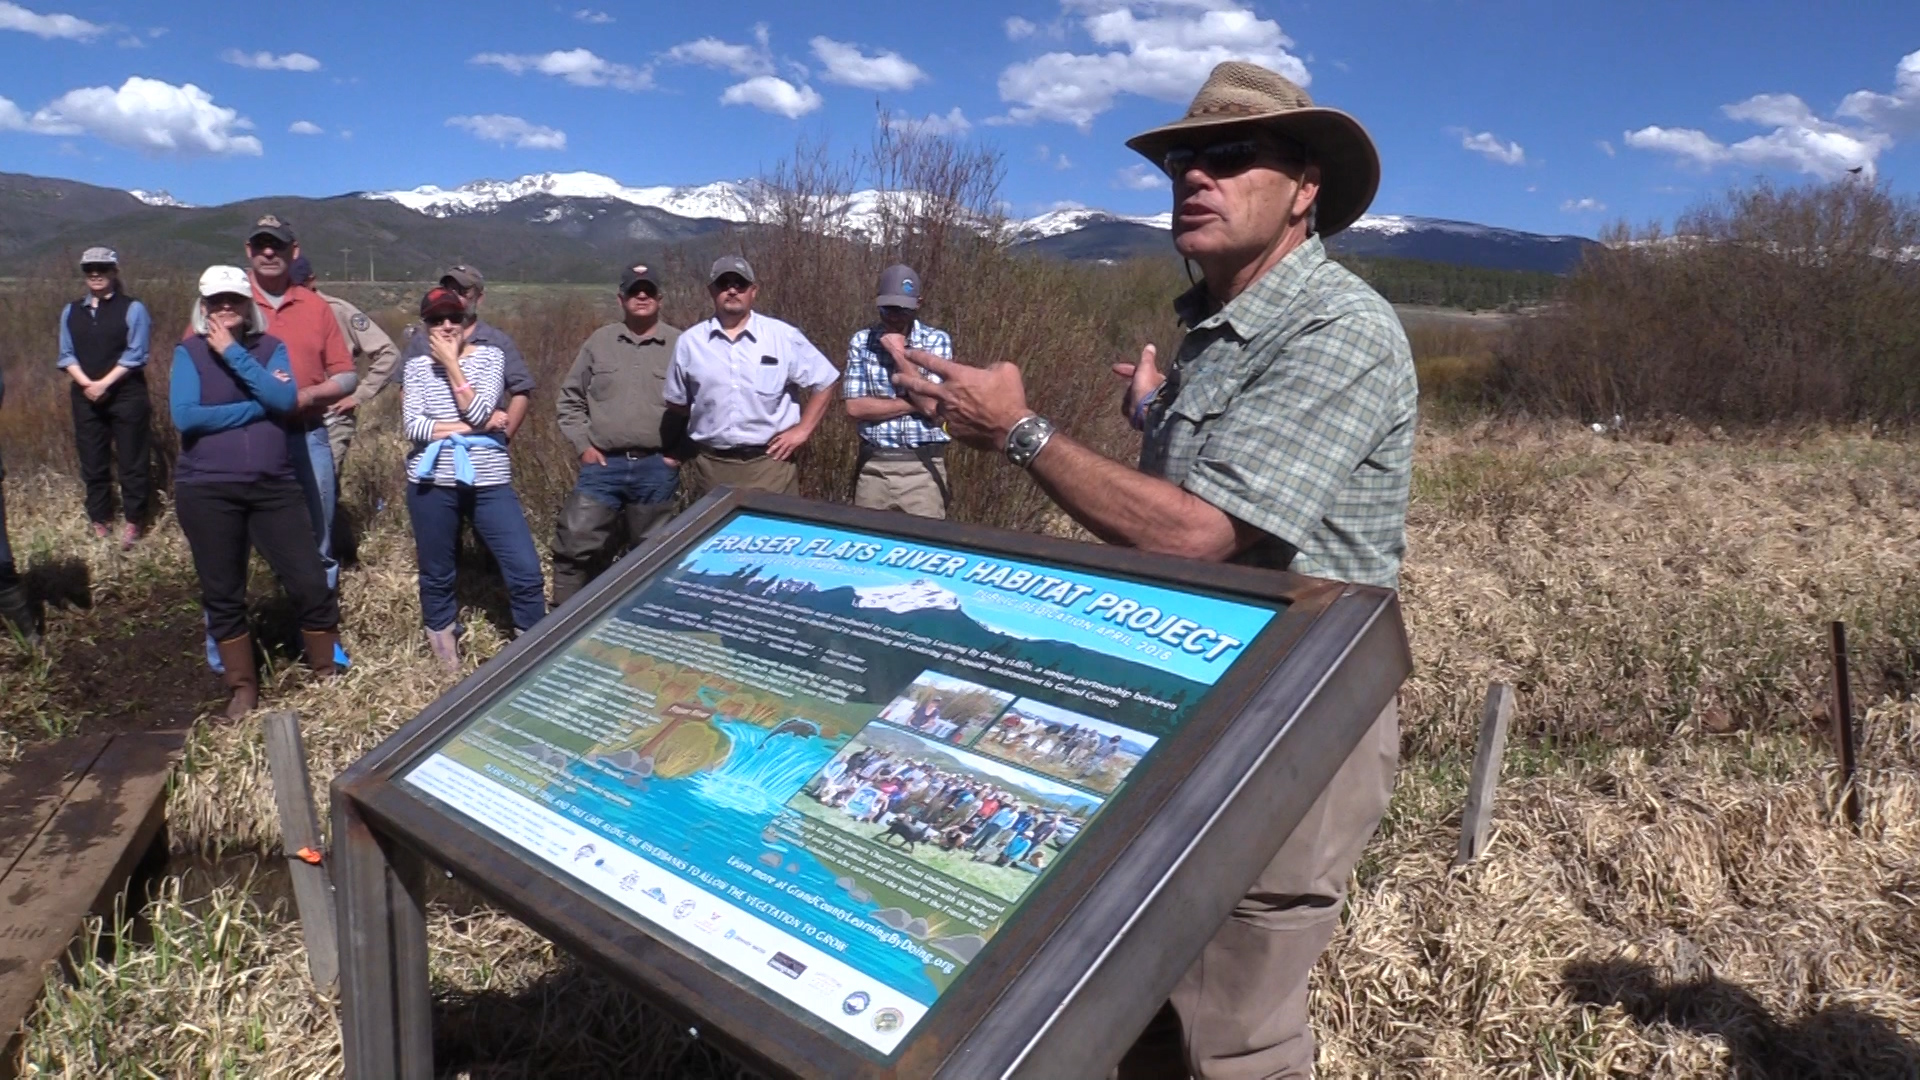 Kirk Klancke, president of the Colorado River Headwaters chapter of Trout Unlimited, explains the restoration work to Learning By Doing partners and members of the Grand County community on May 16, 2018.